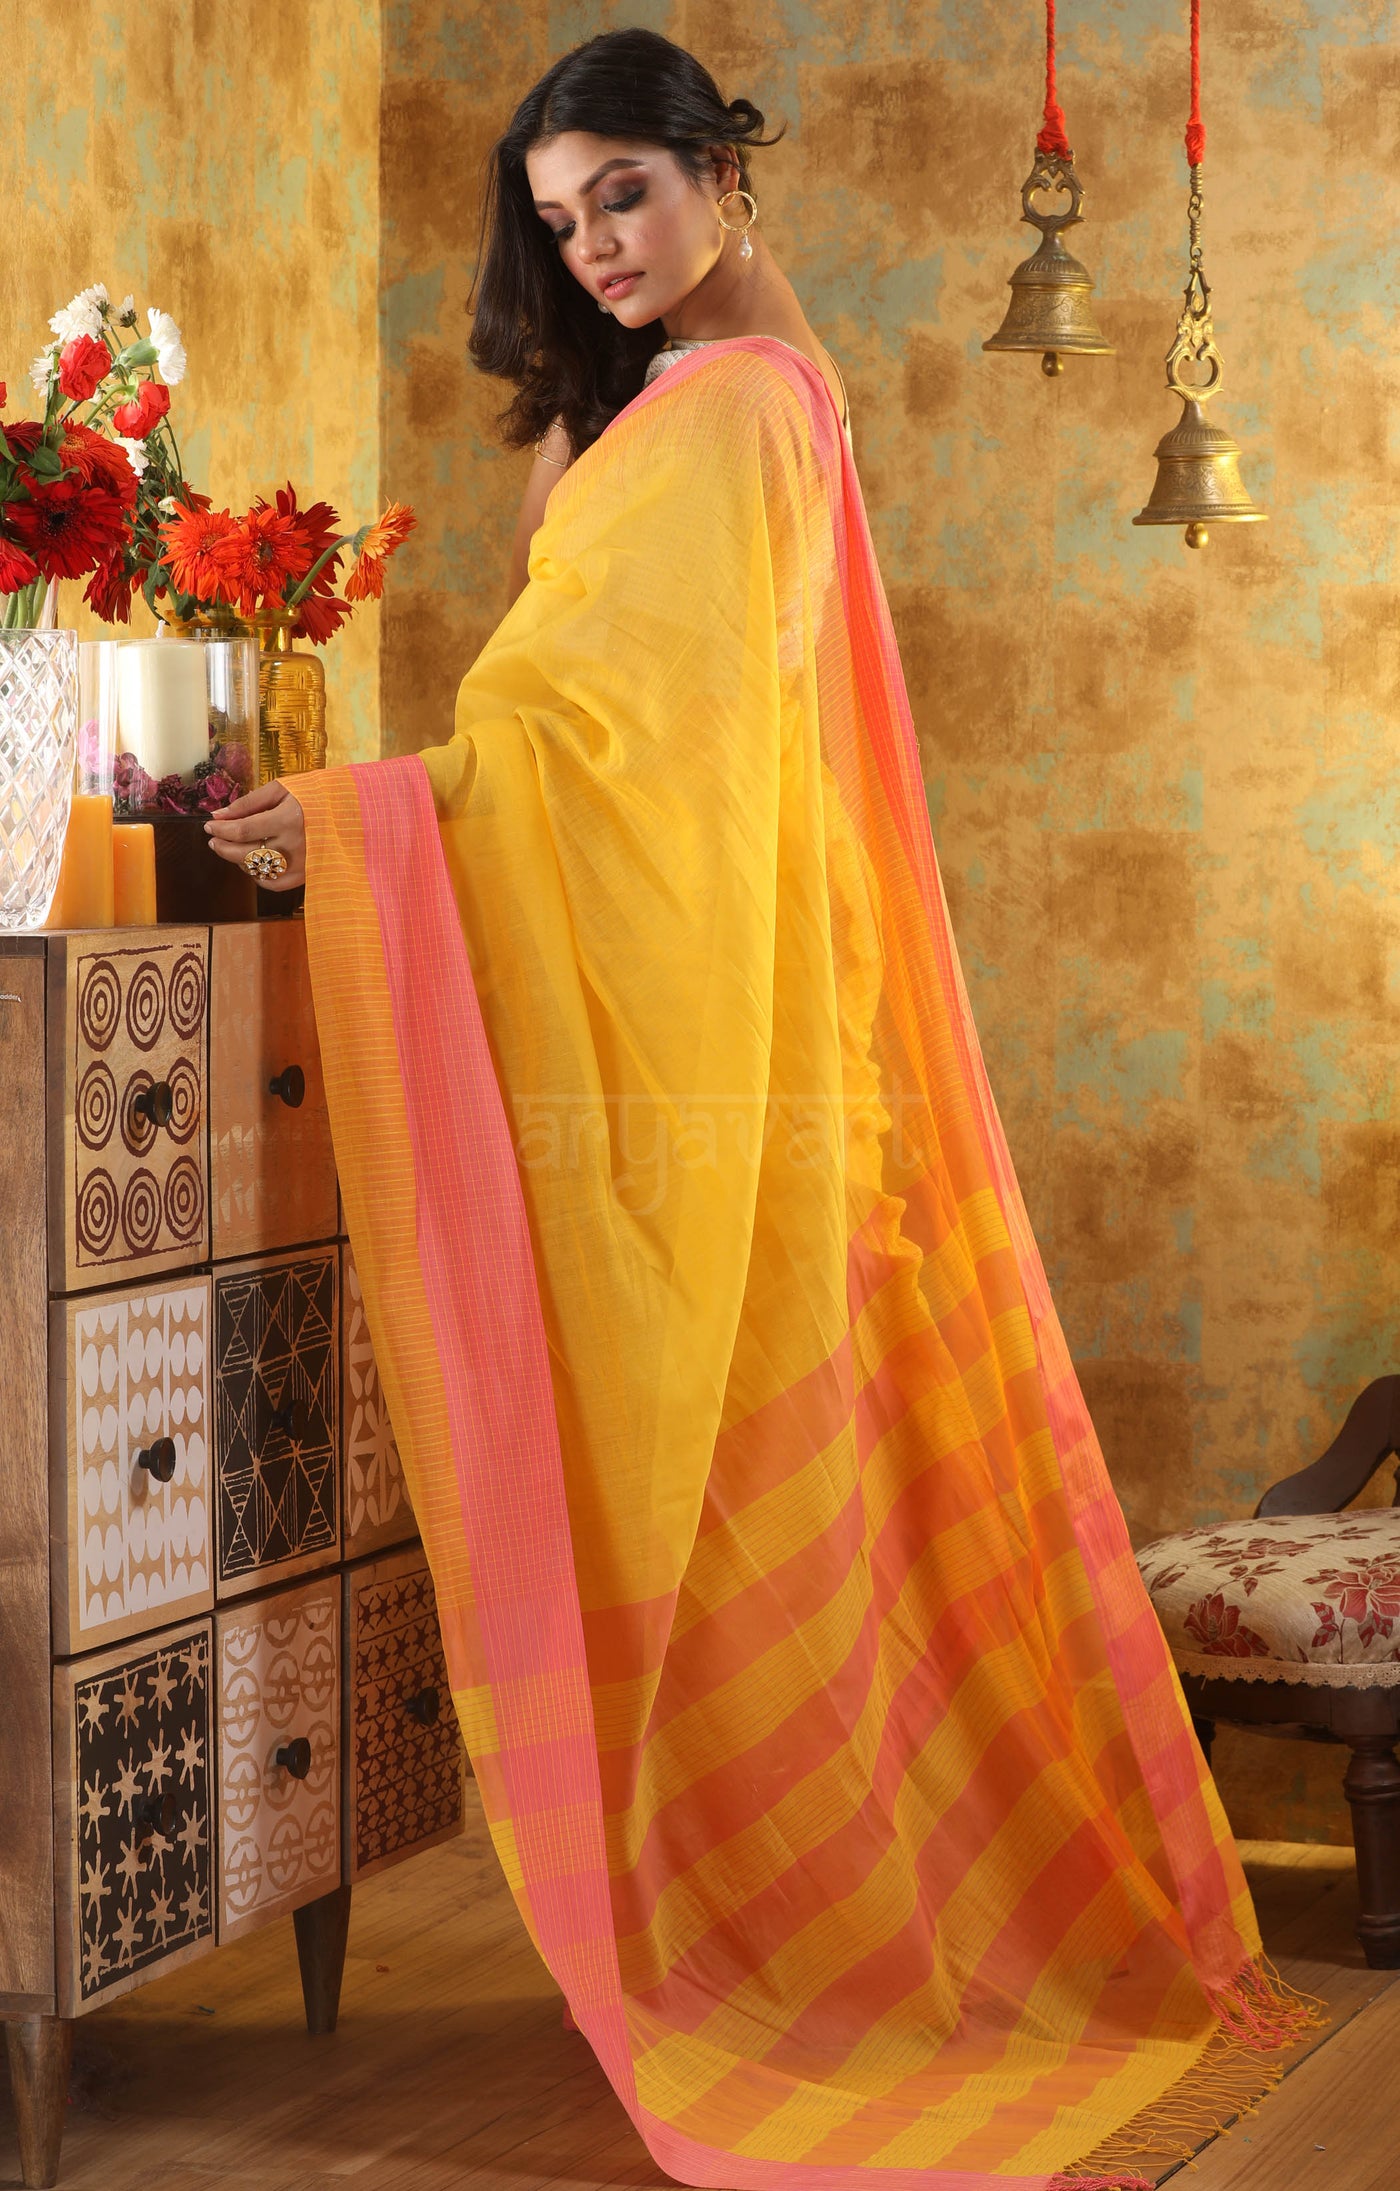 Sunflower Yellow Cotton Saree With Woven Check Design on Contrasting Pink Border